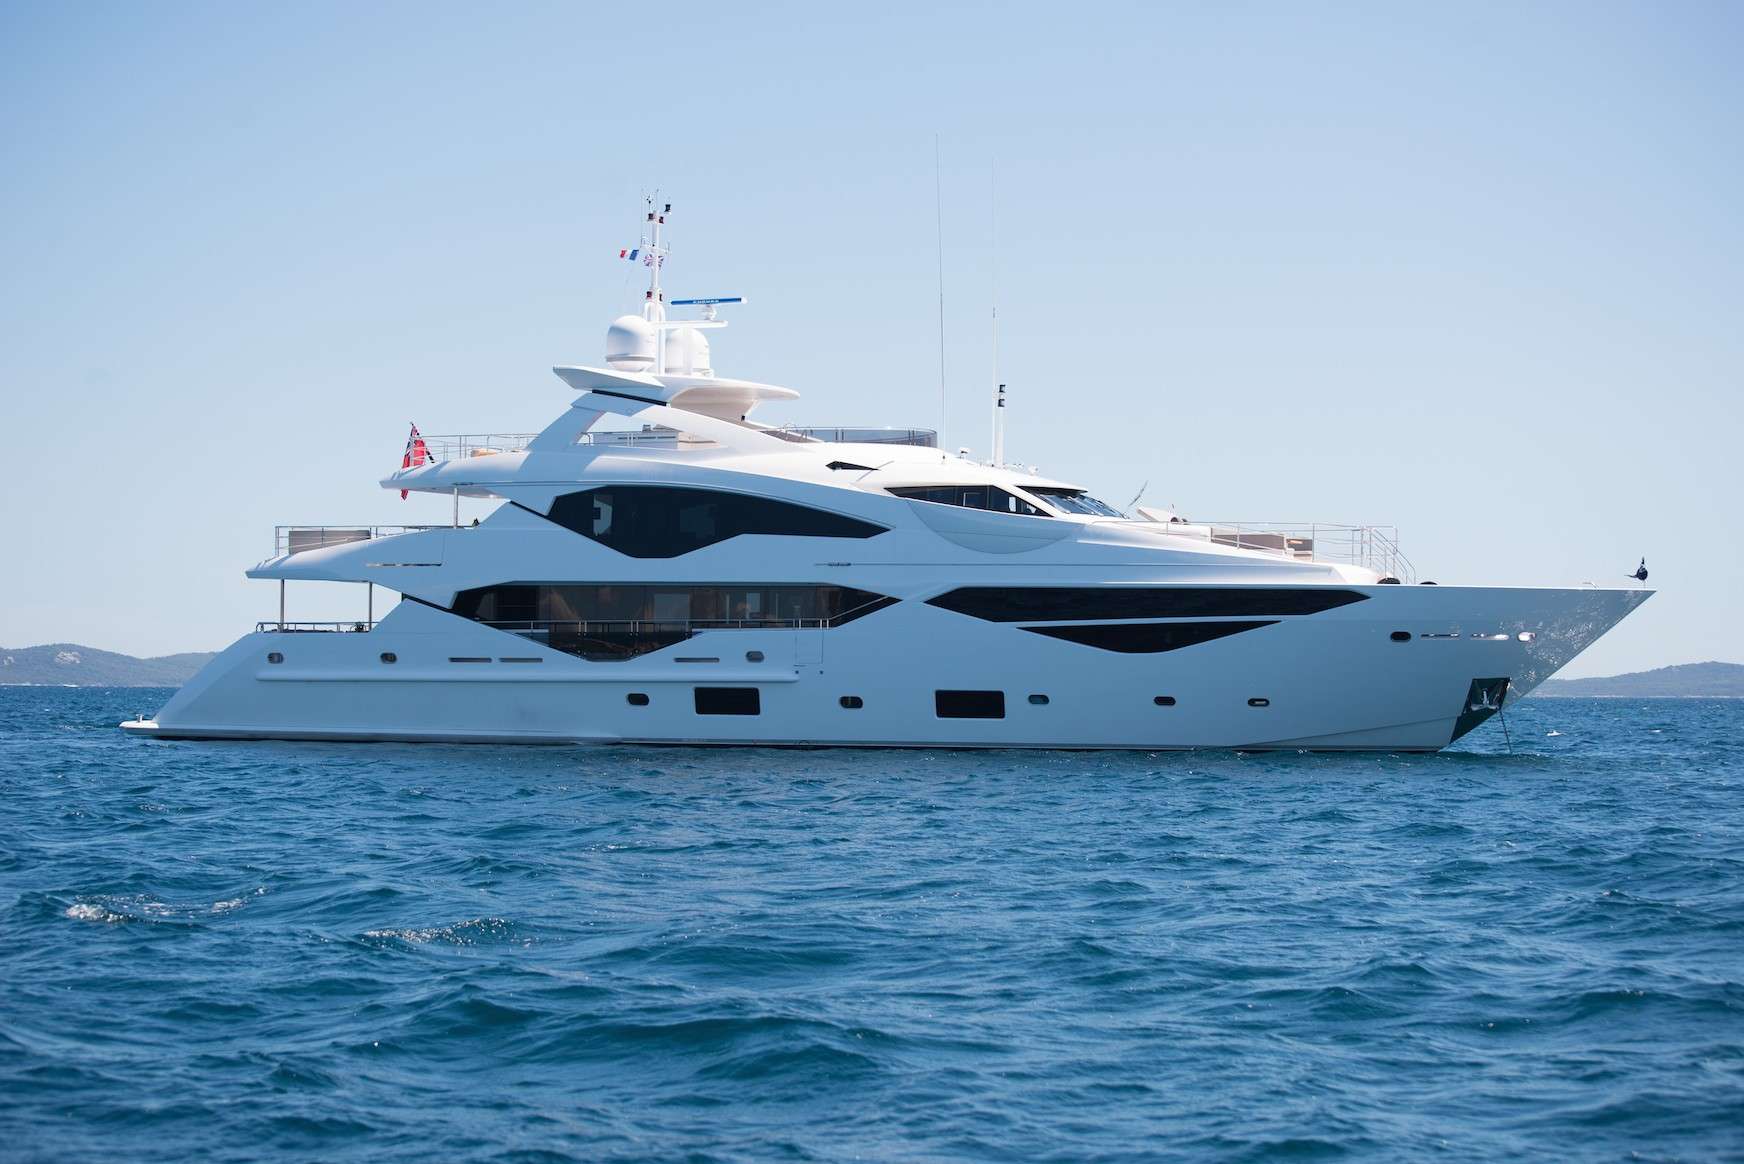 E-MOTION - Yacht Charter Antibes & Boat hire in Fr. Riviera, Corsica & Sardinia 1